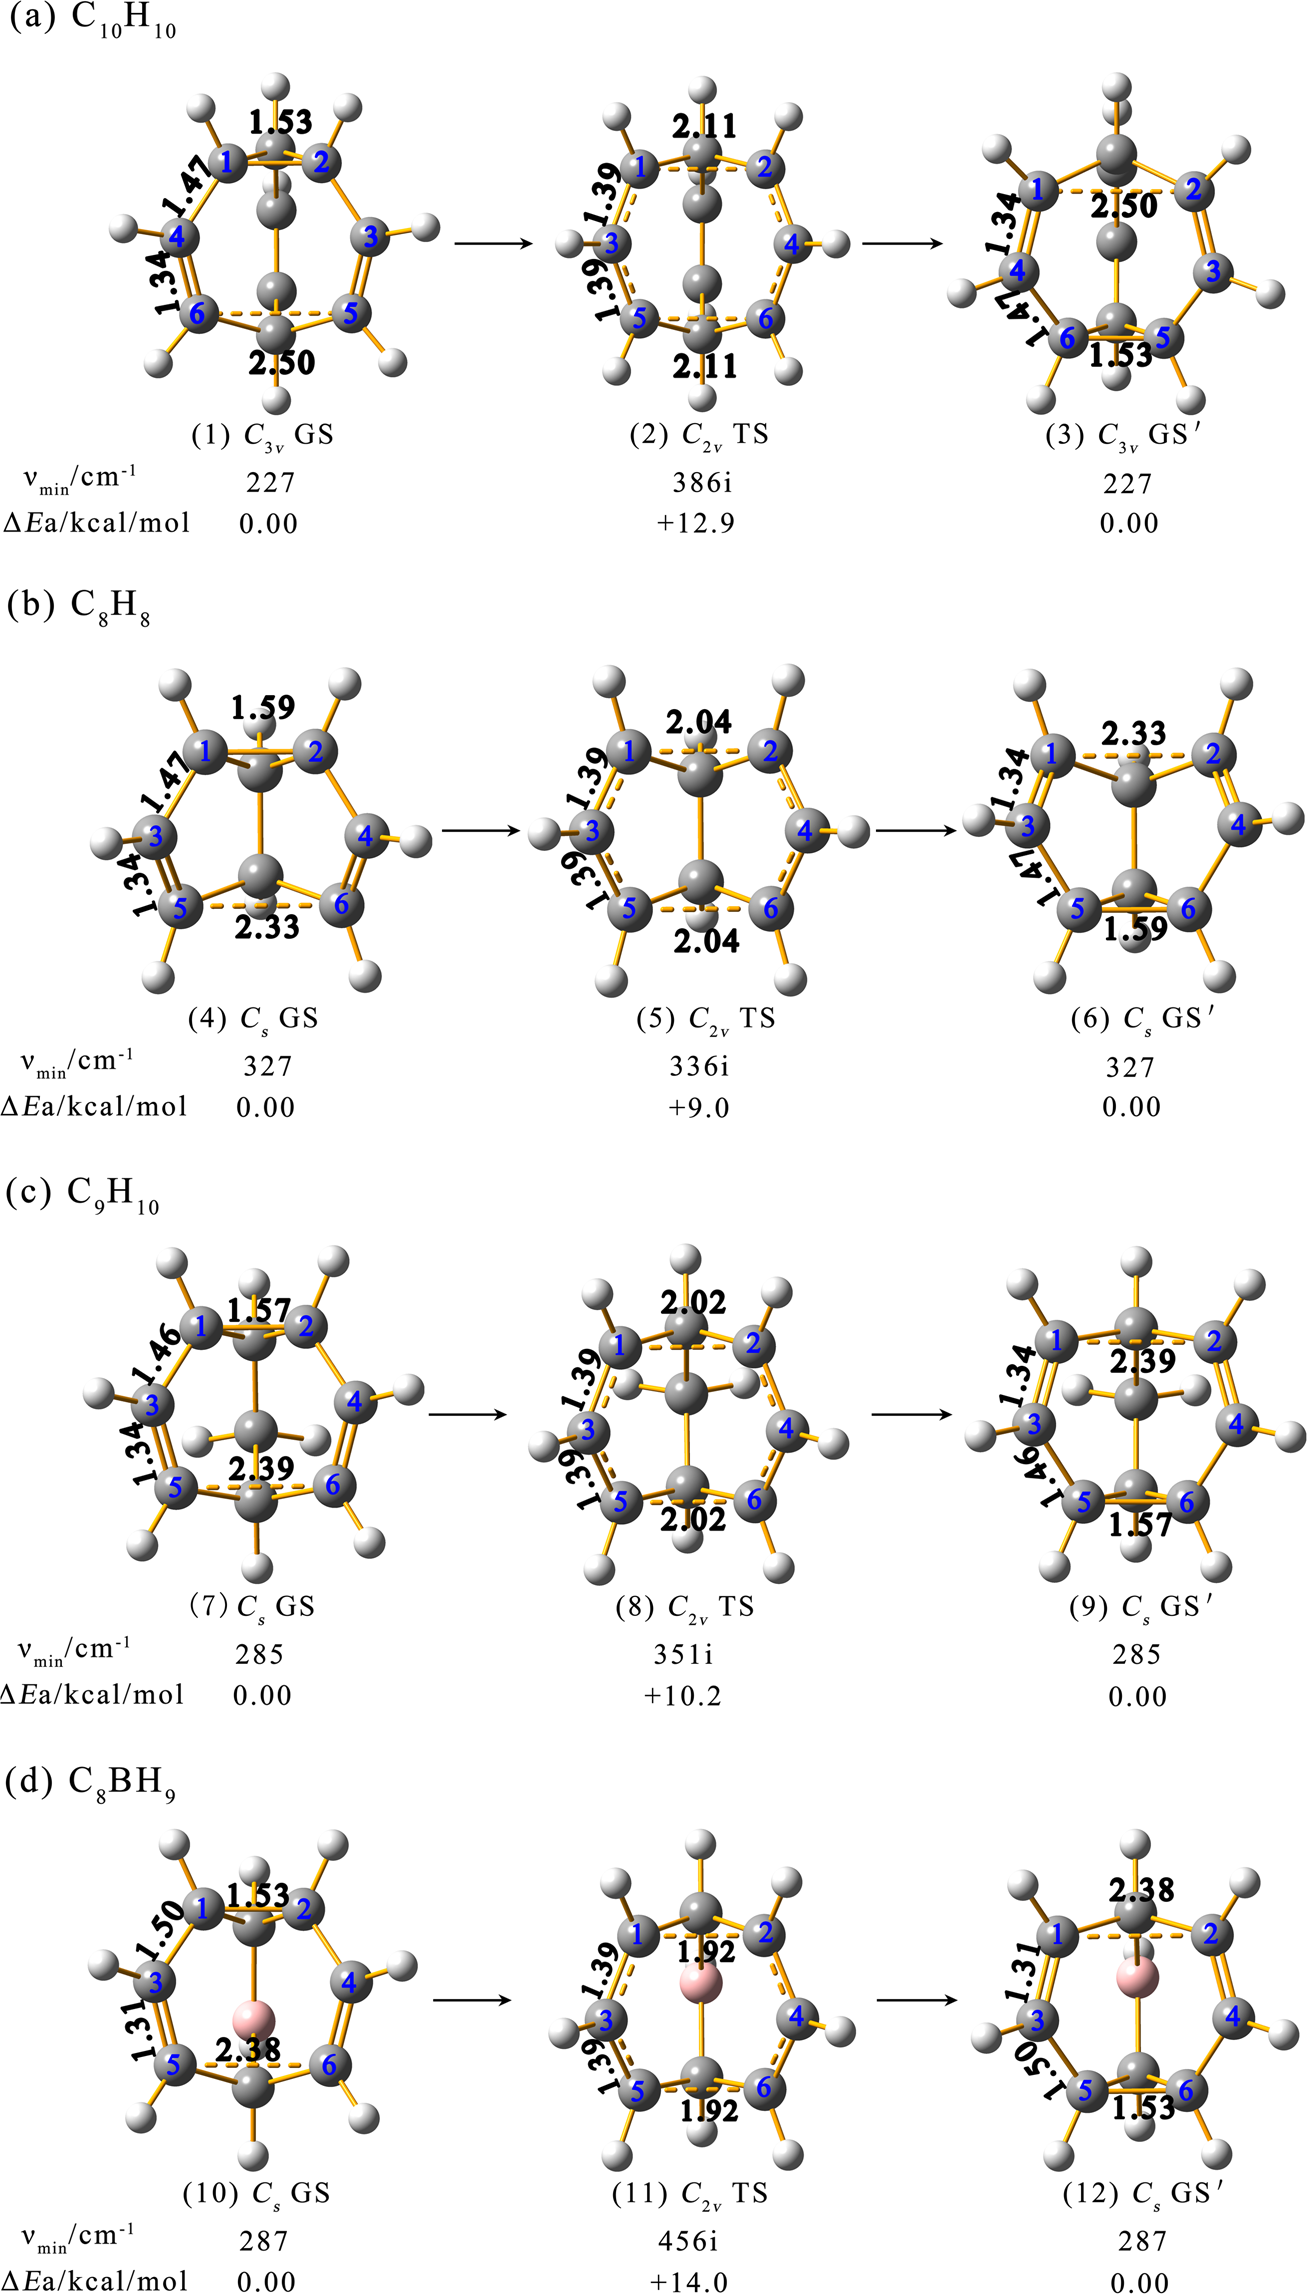 Probing the Fluxional Bonding Nature of Rapid Cope rearrangements in  Bullvalene C10H10 and Its Analogs C8H8, C9H10, and C8BH9 | Scientific  Reports